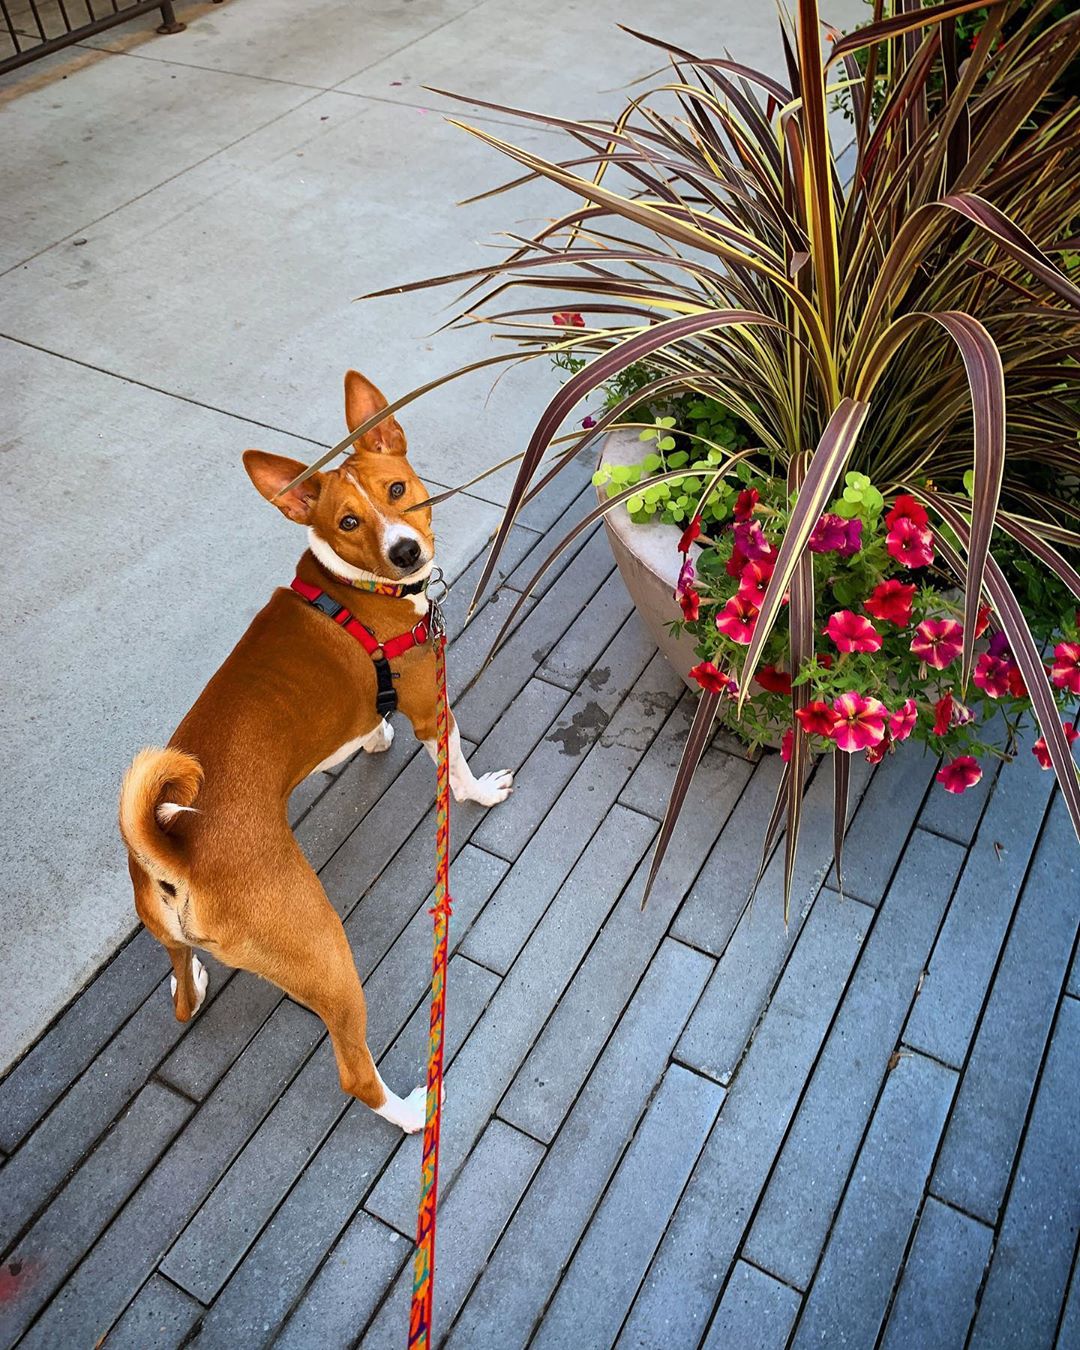 A Basenji standing on the pavement next t a large potted plant